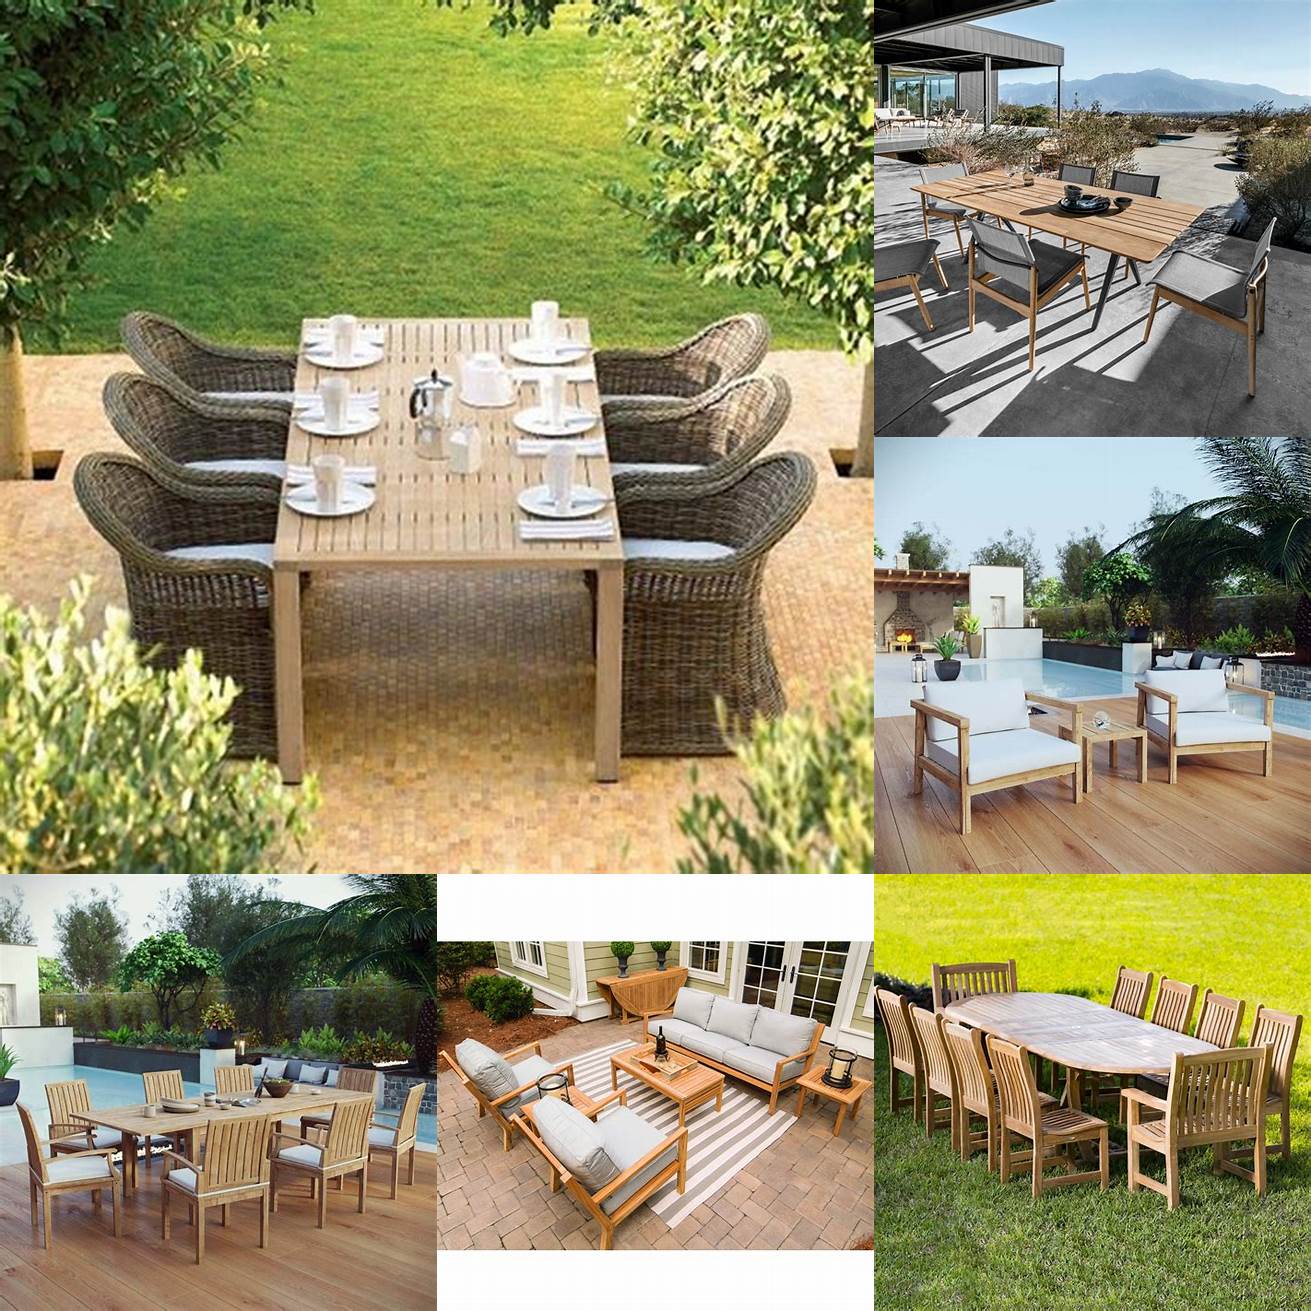 A picture of a Gloster teak outdoor furniture set in an outdoor setting